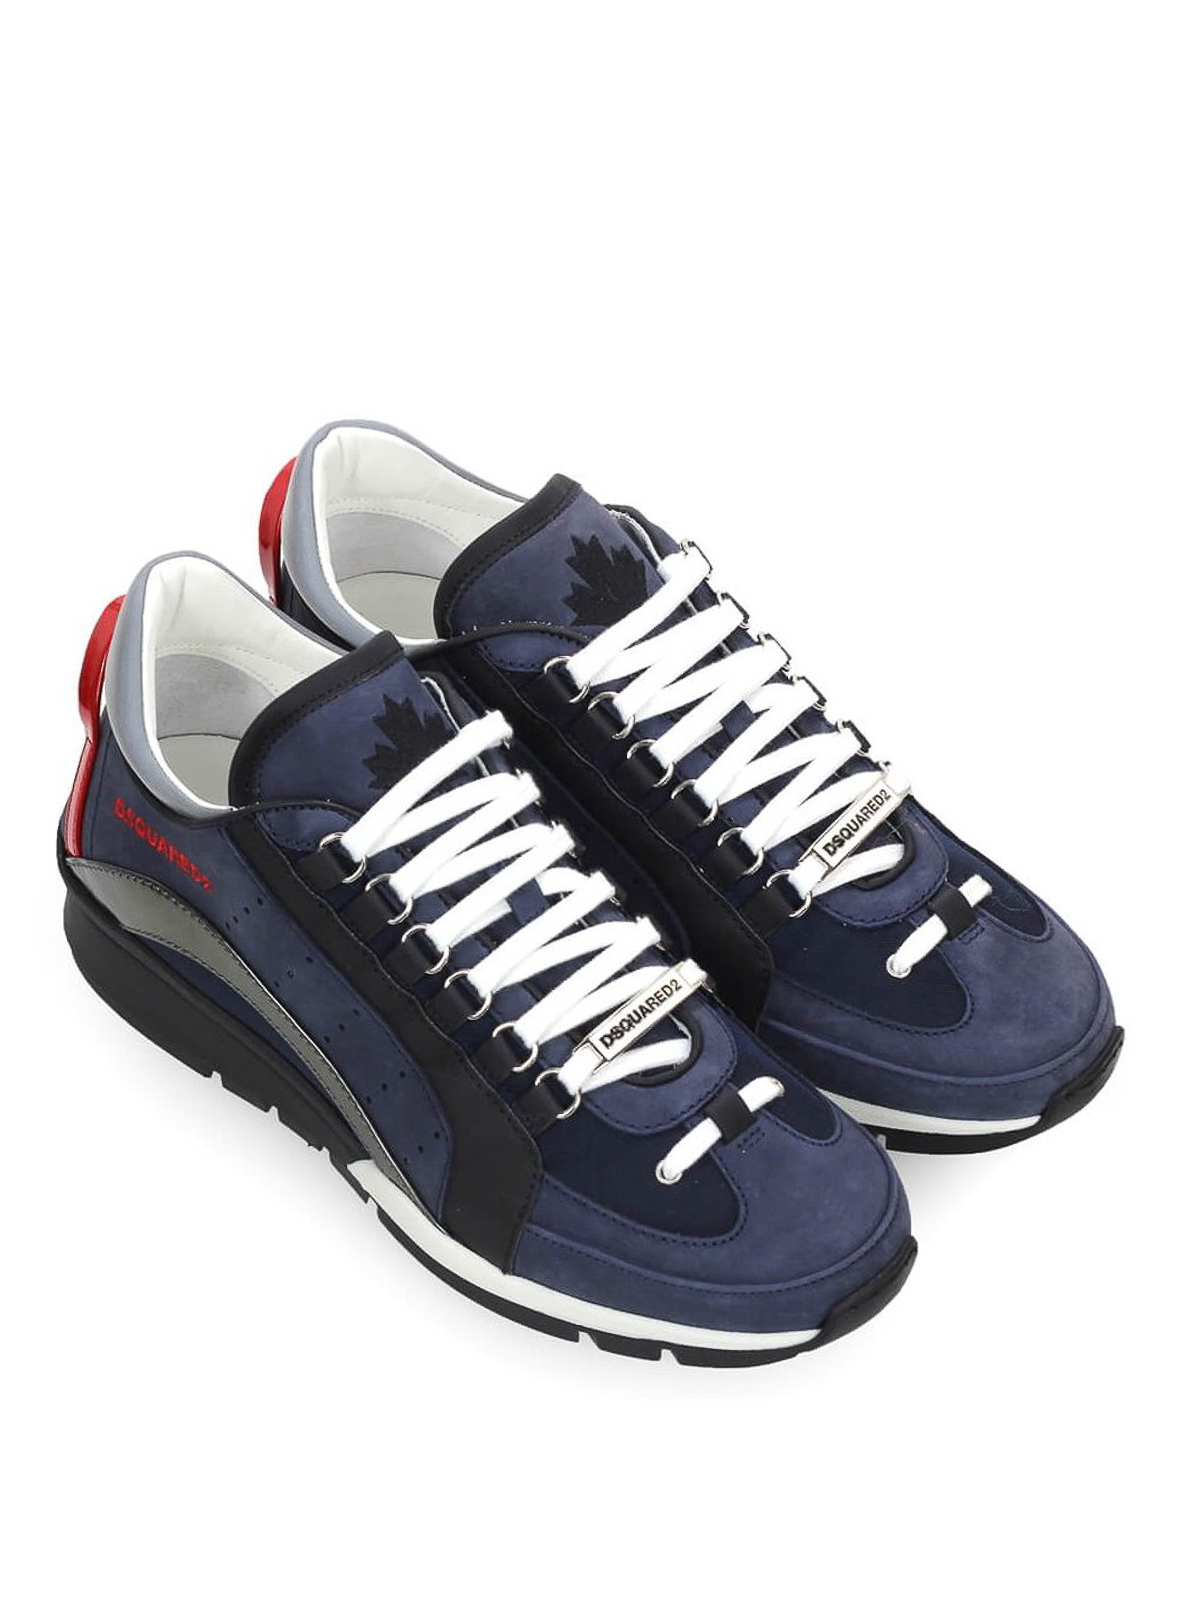 dsquared2 551 sneakers blue